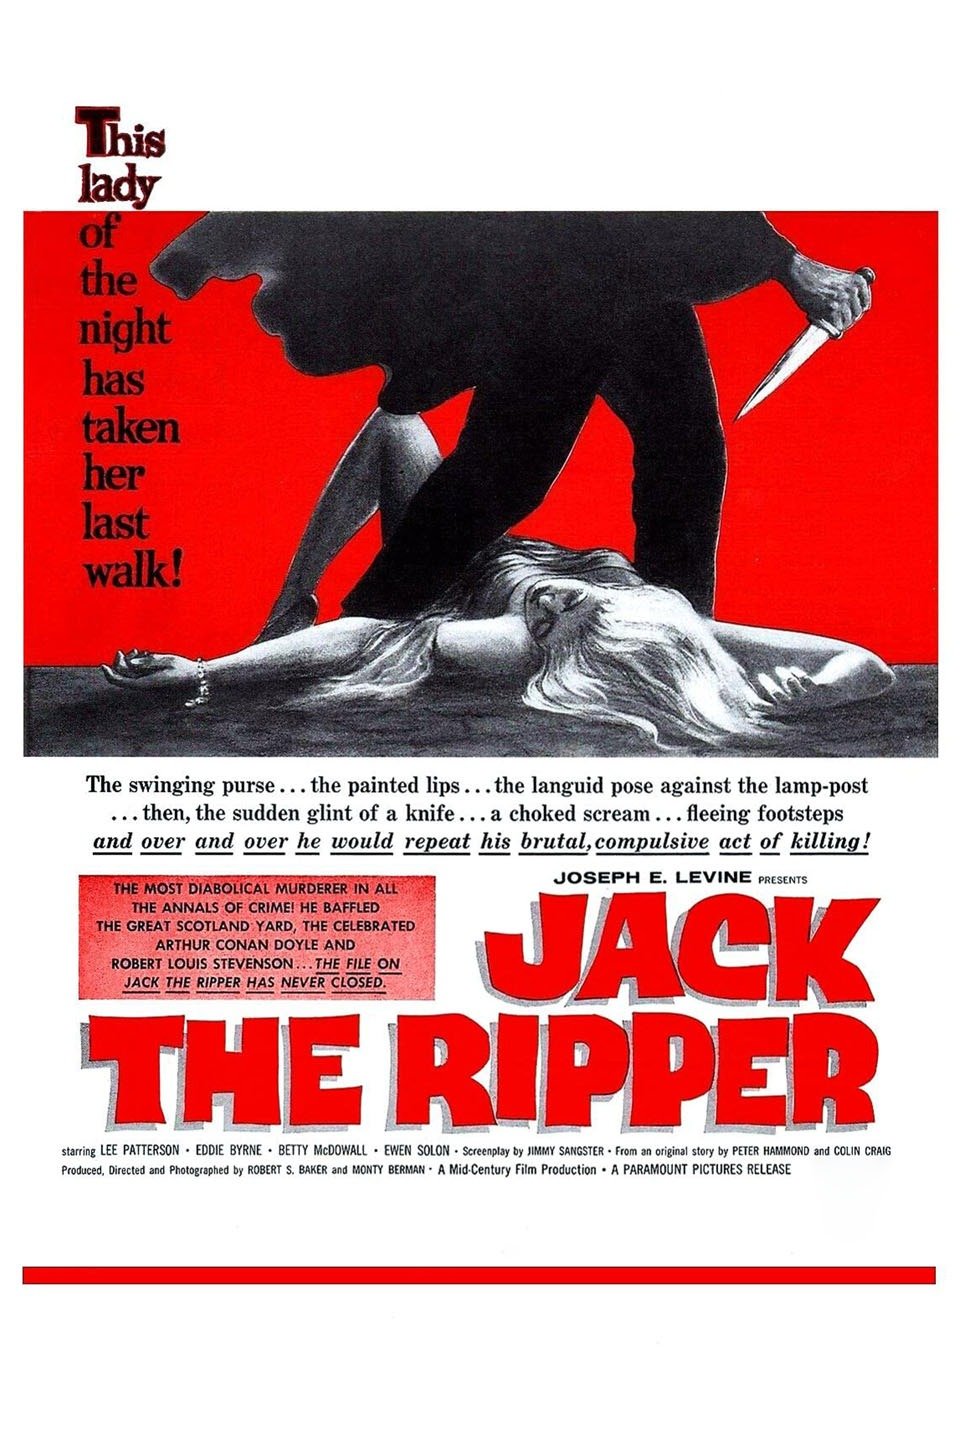 Jack the Ripper Pictures image